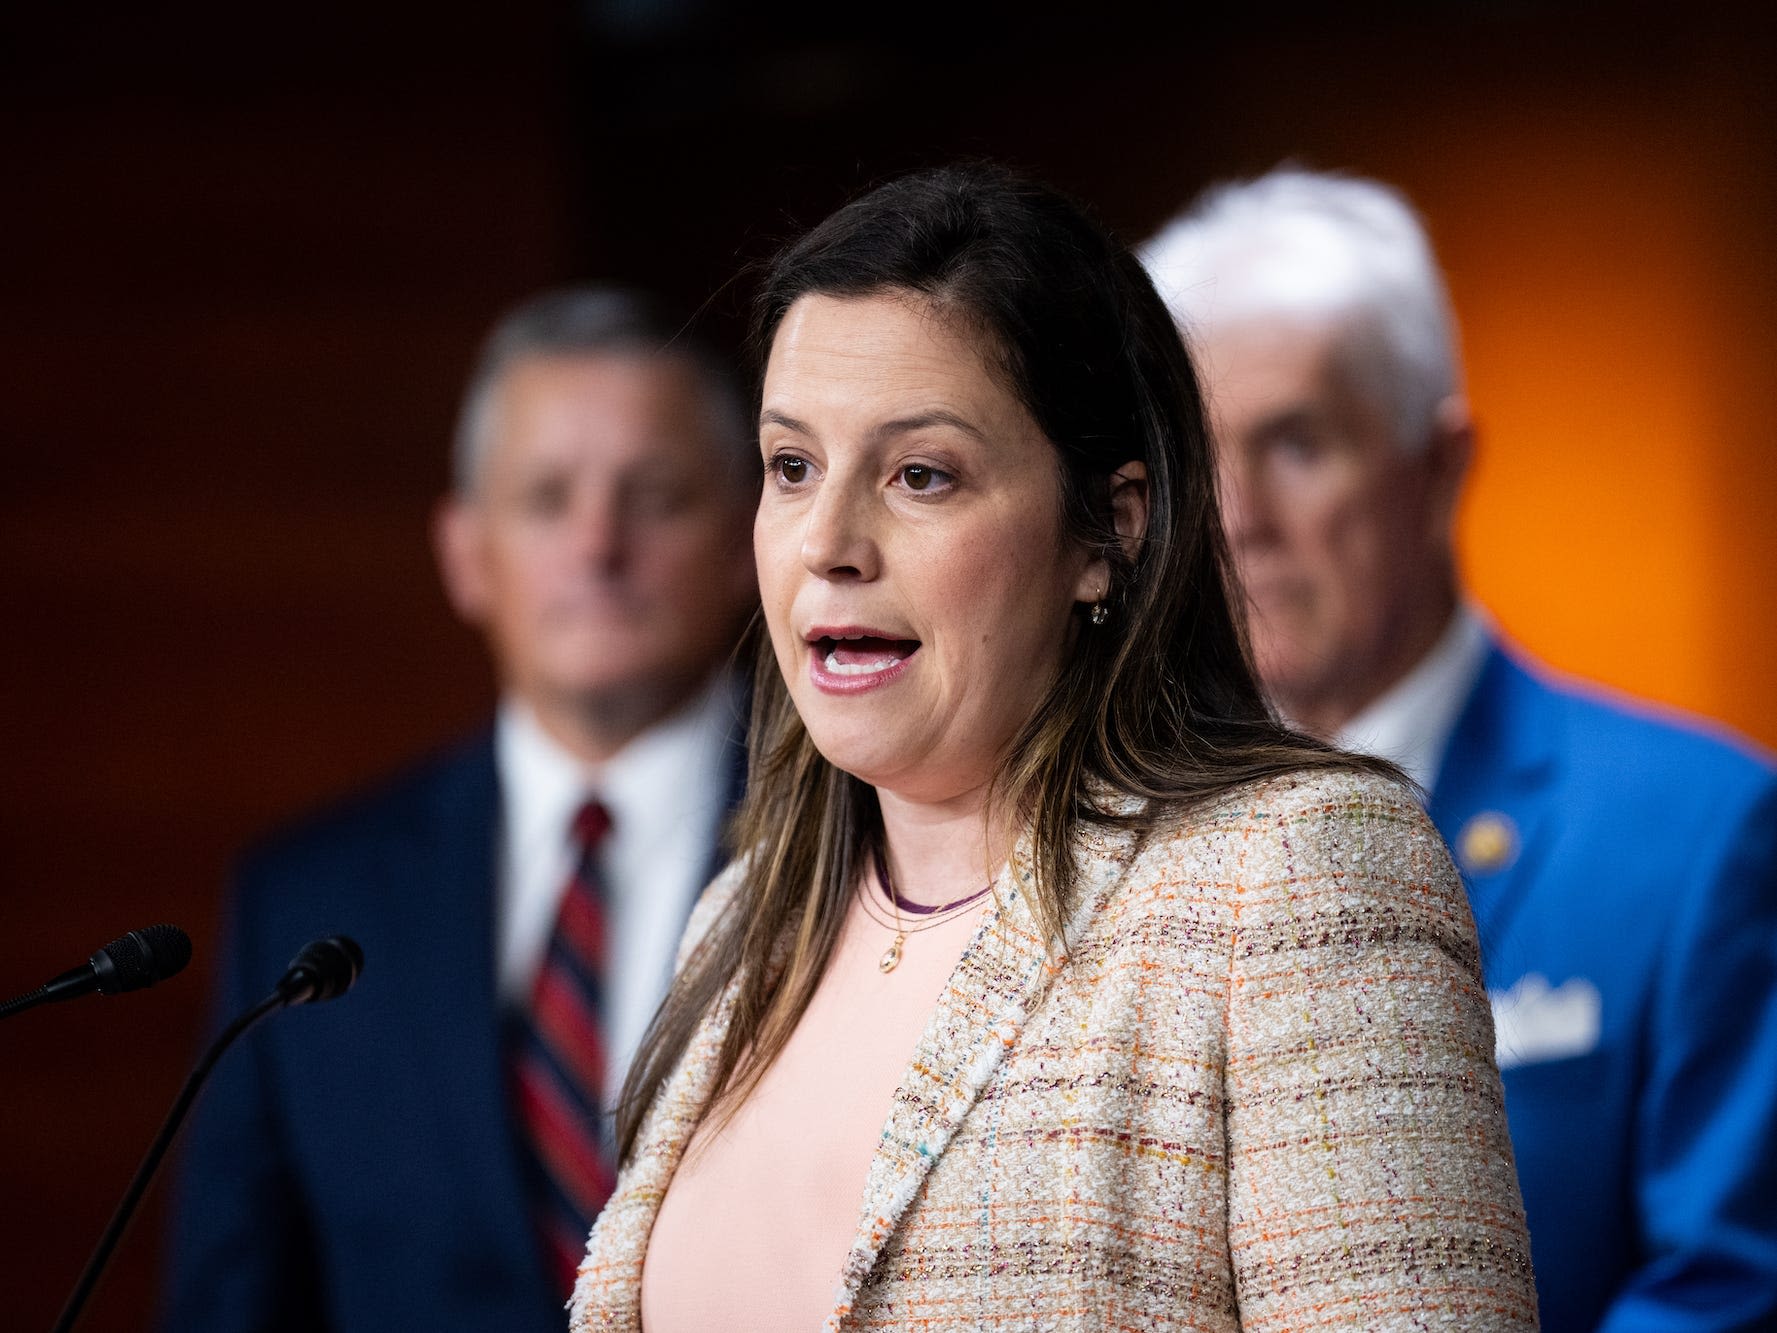 Elise Stefanik would be a really bad VP choice for Trump, poll shows